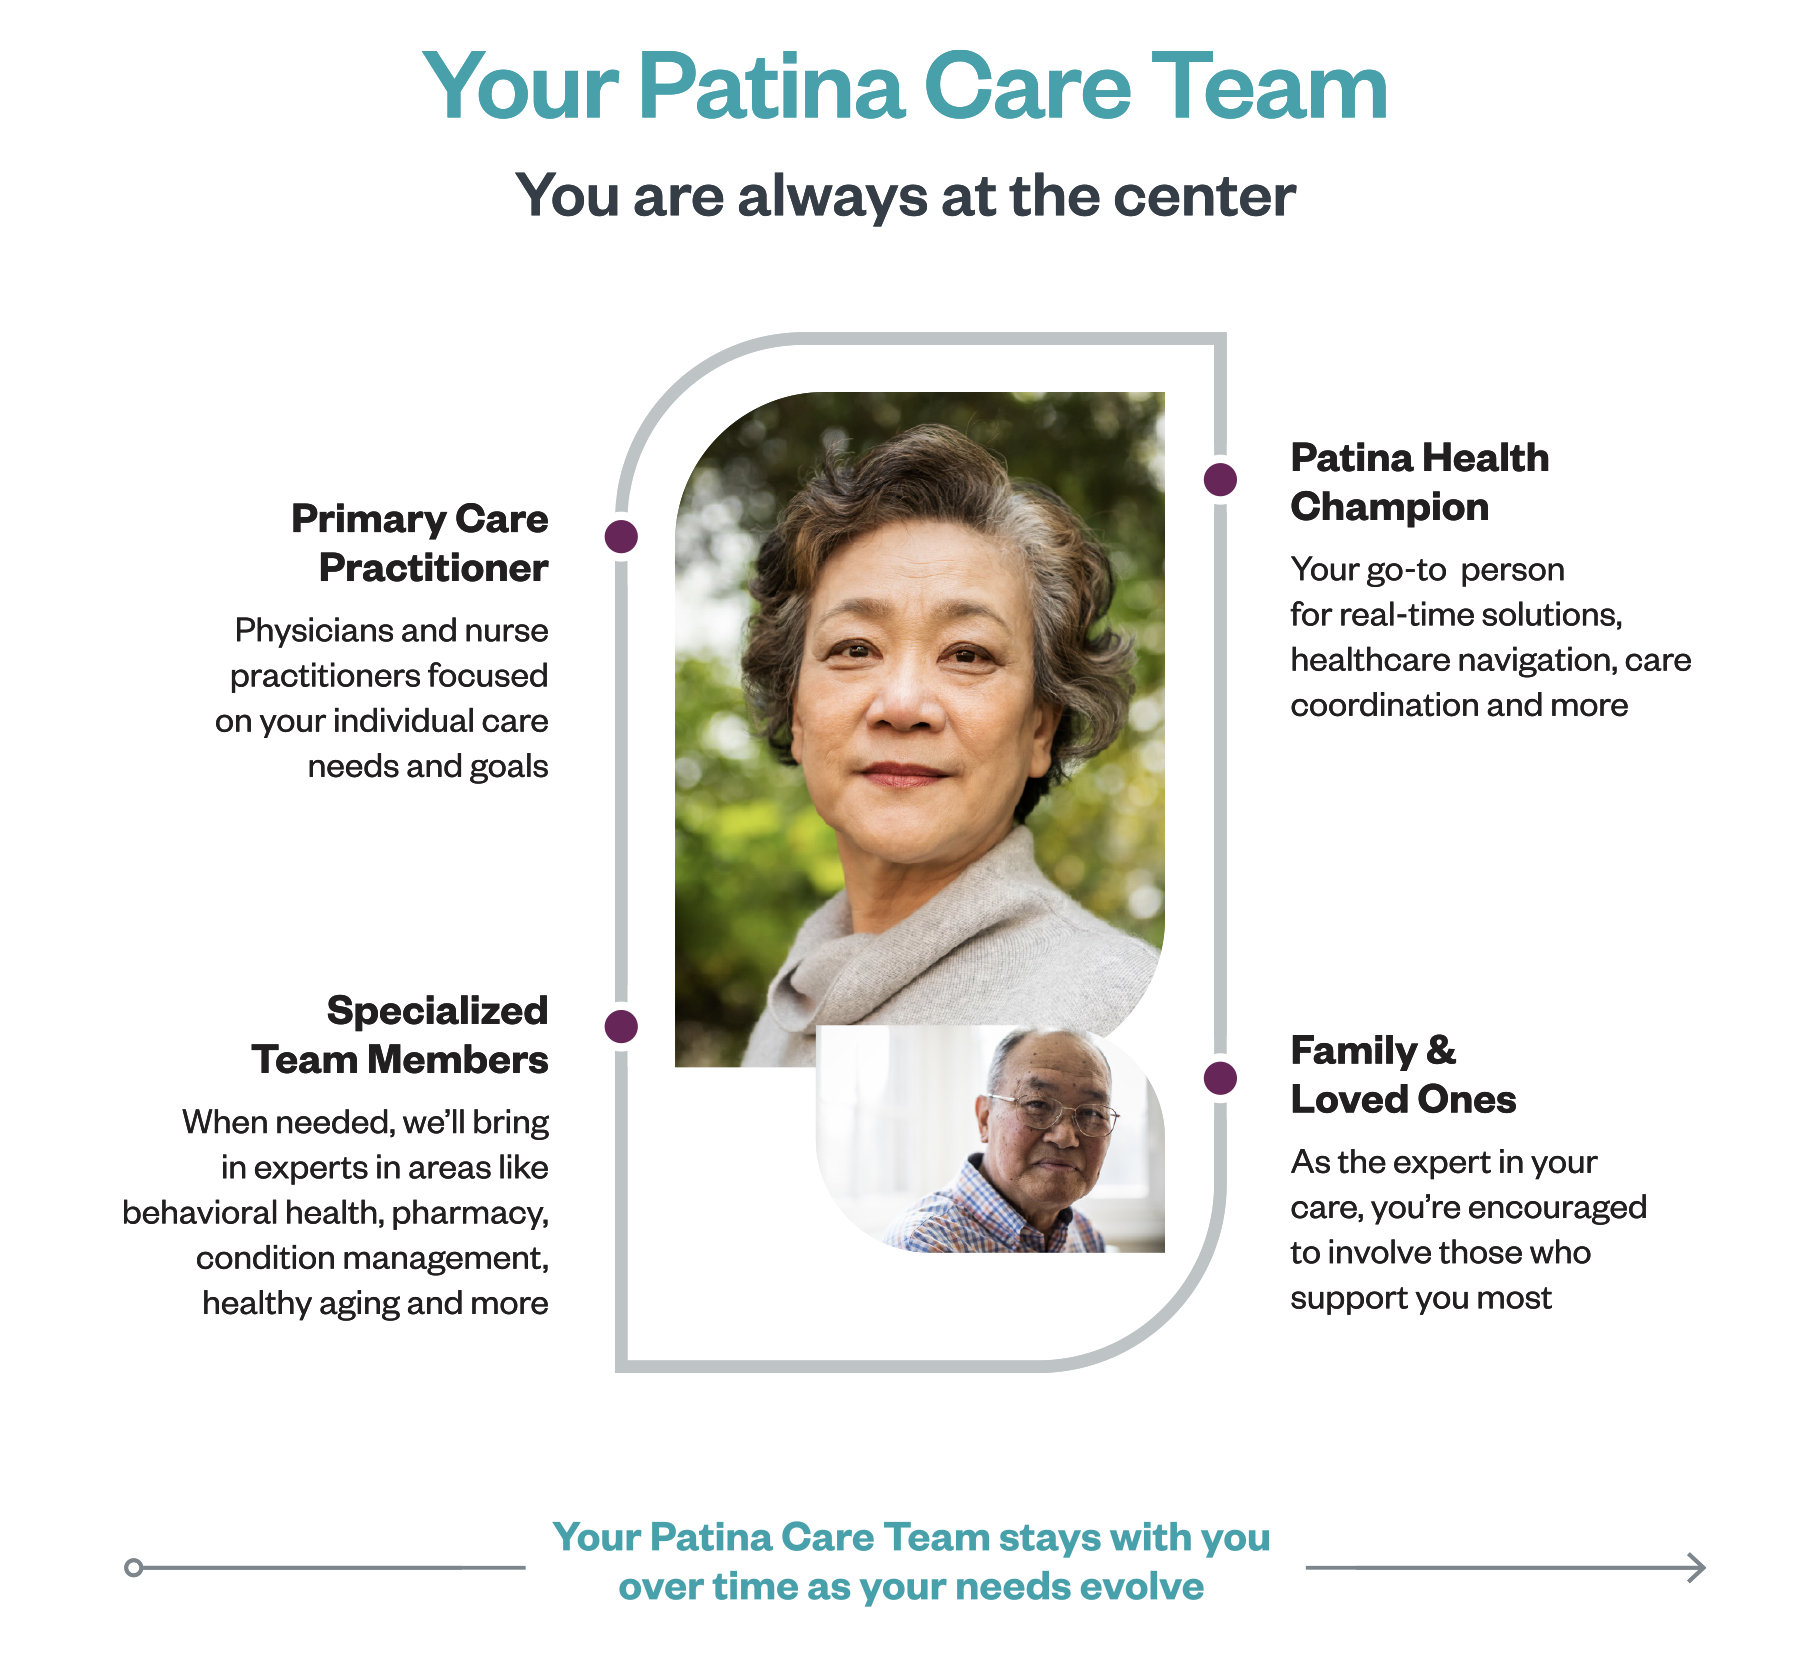 Your Patina Care Team